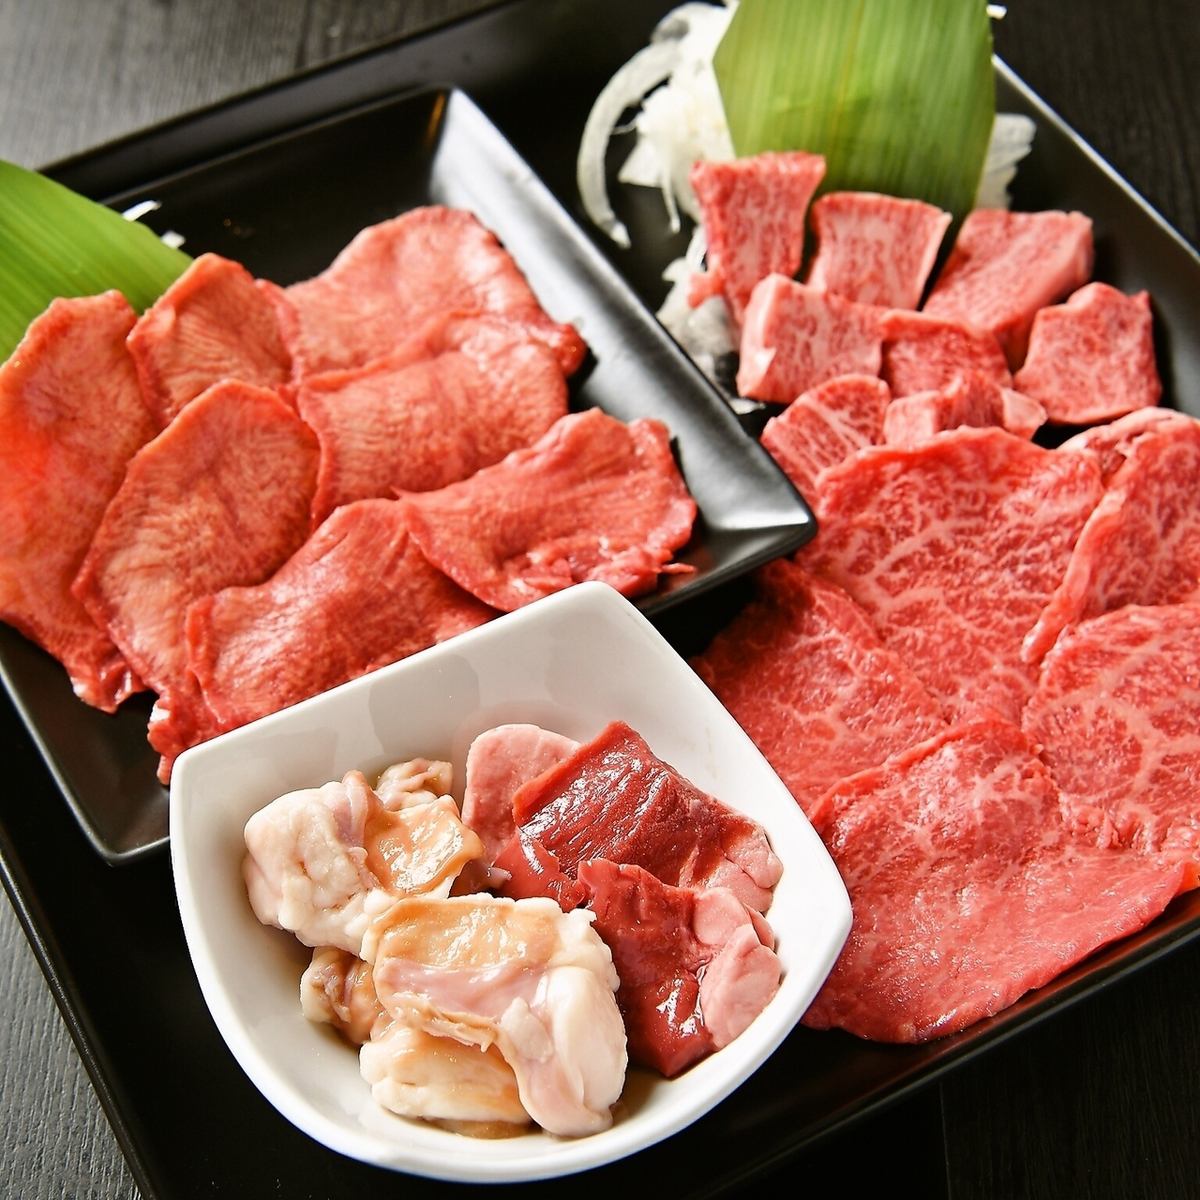 We are particular about the quality of A5 rank Japanese beef.The meat quality is the best in Kanto!